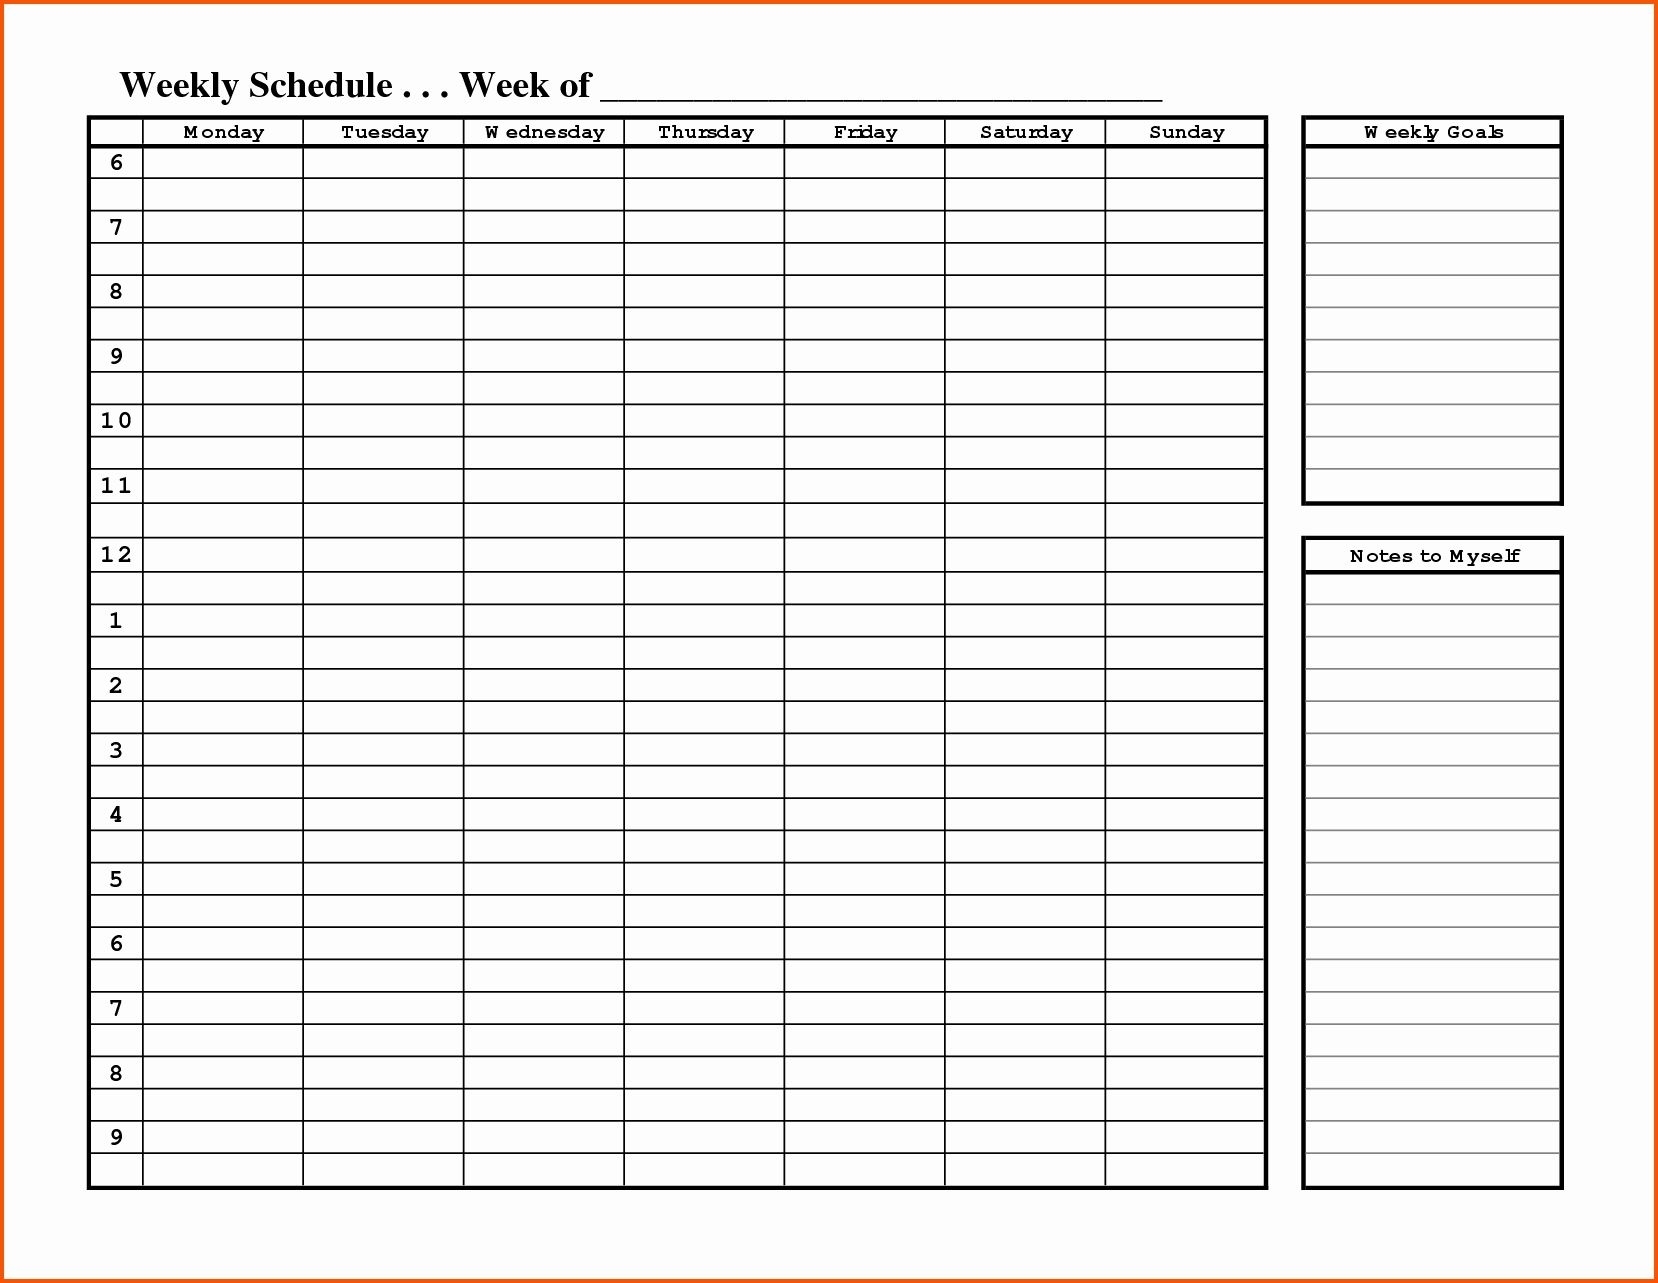 Weekly Hourly Planner Template Word | Daily Schedule Calendar Template By Hour